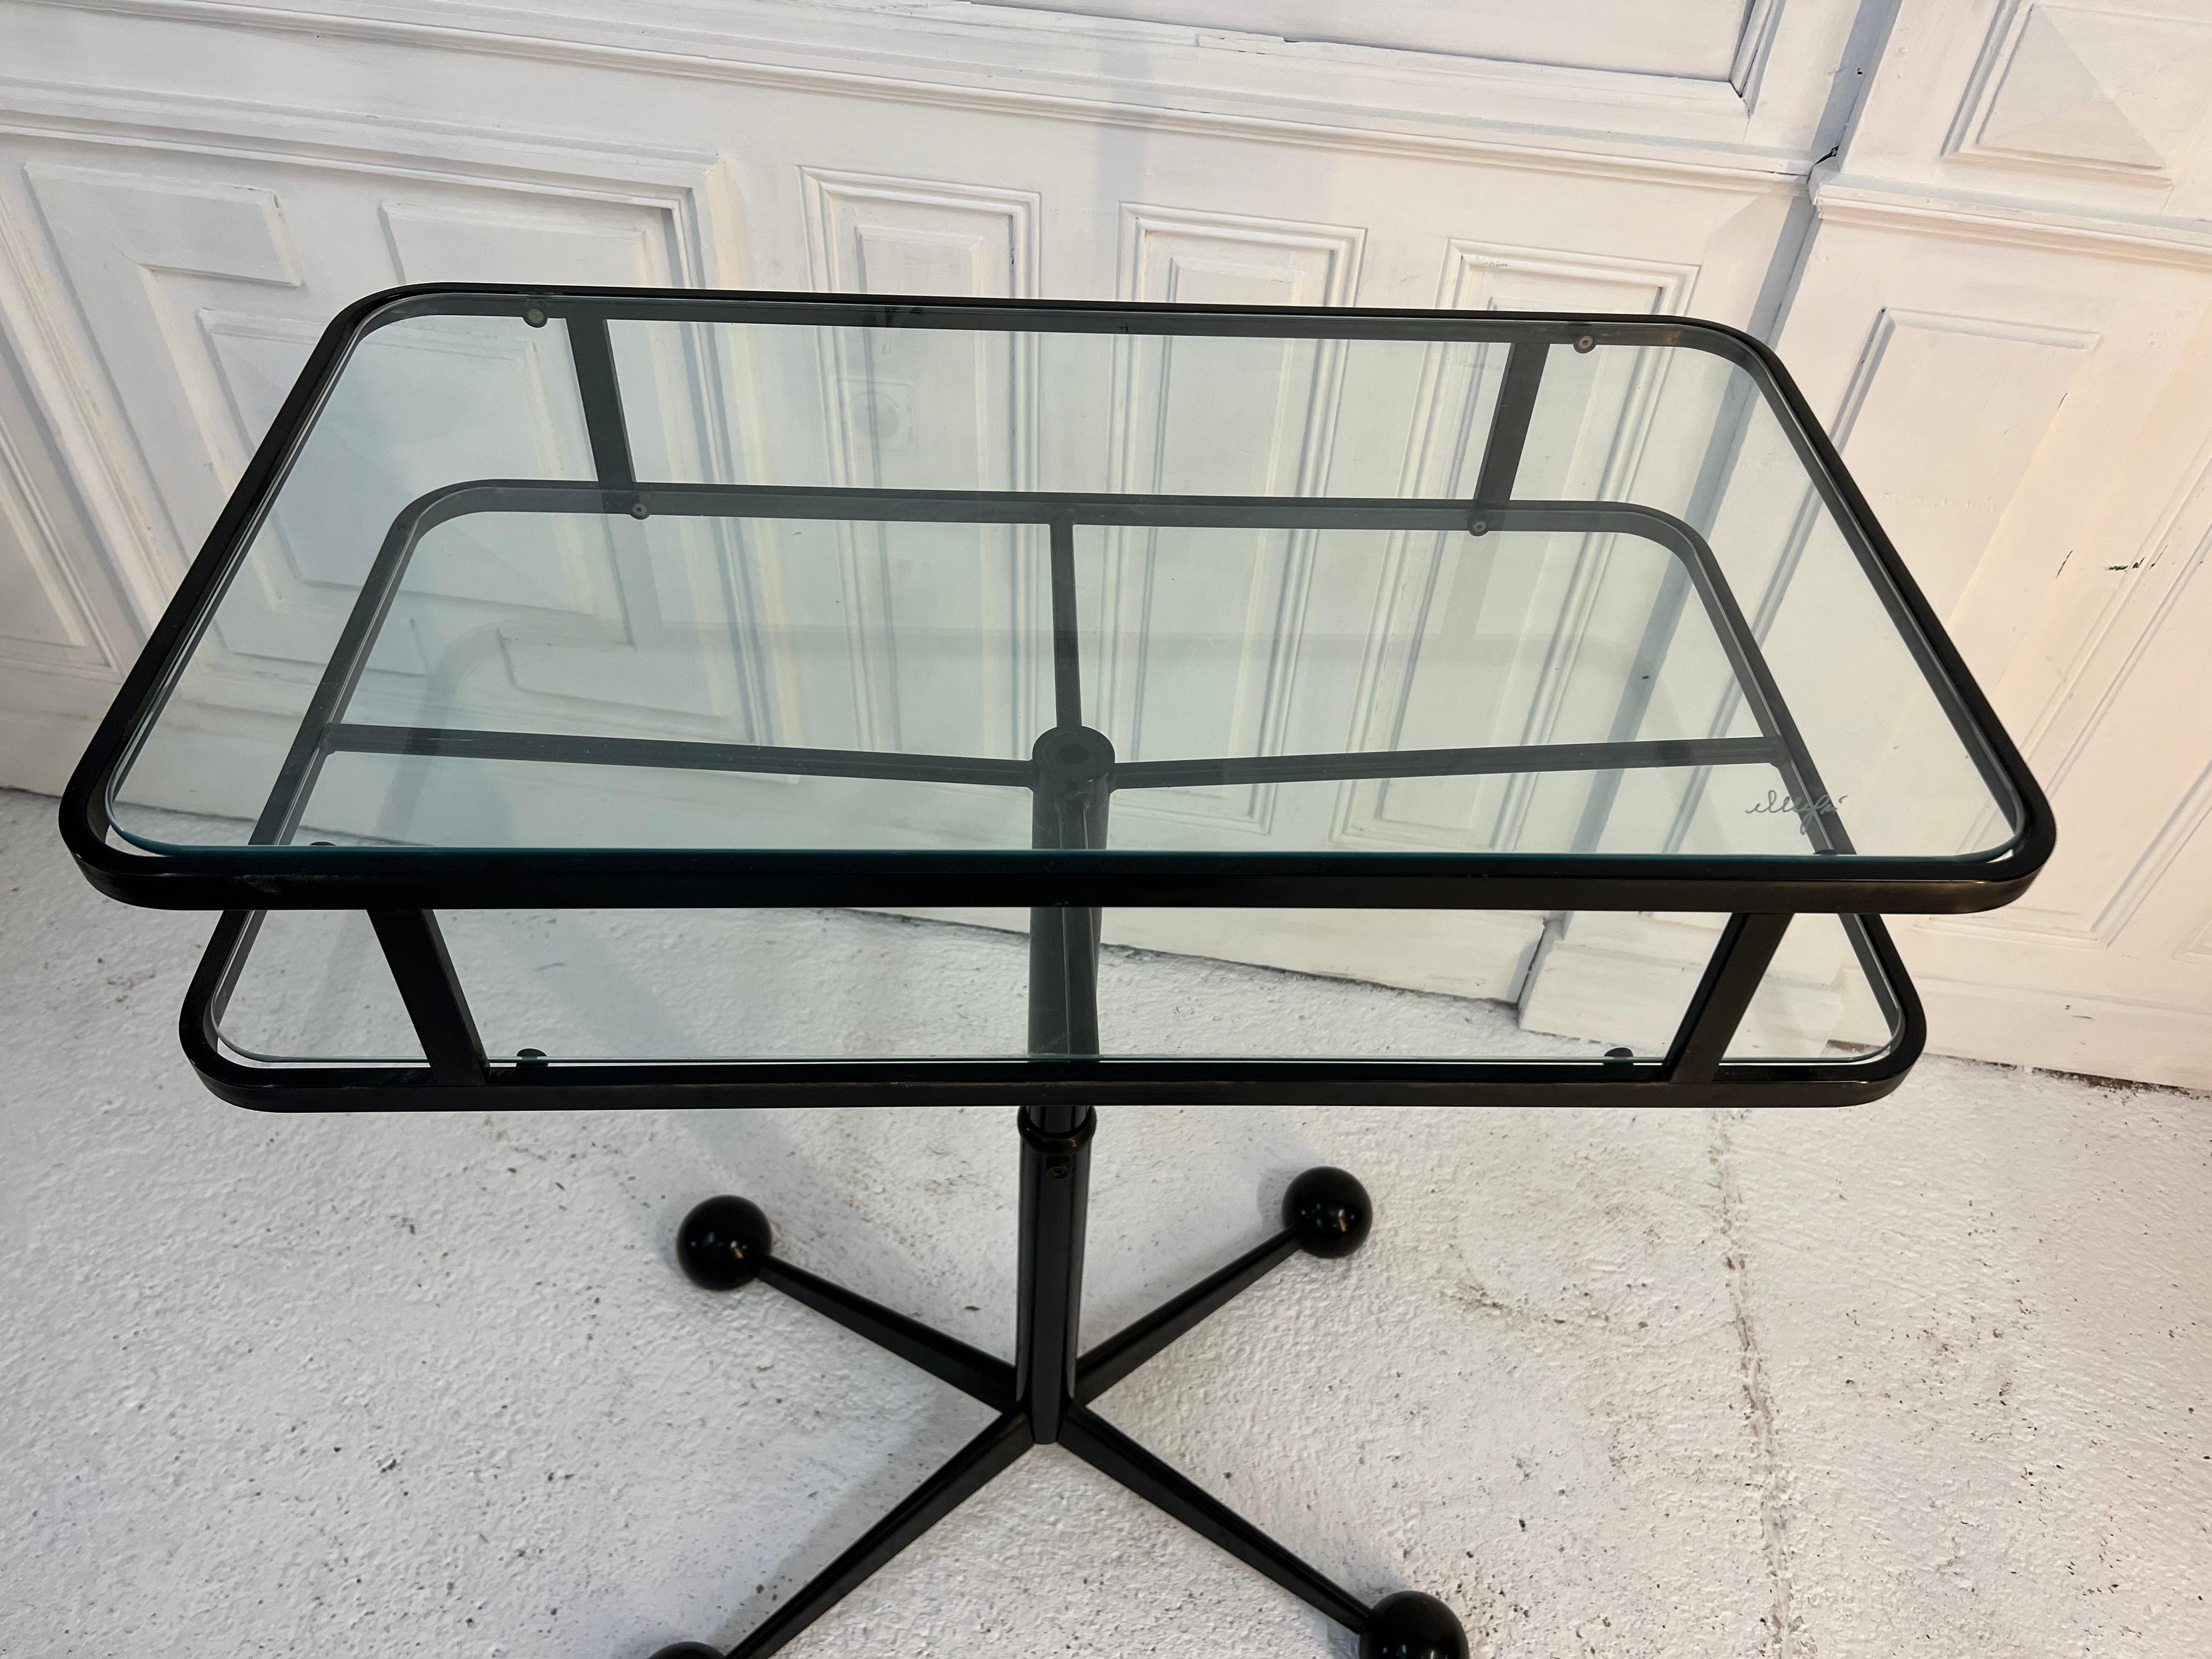 Vintage rolling side table by Allegri Arredementi, Italy
the double top is adjustable in height, minimum 55 cm and maximum 110 cm
its star base gives it this very 1950 1960 style.

